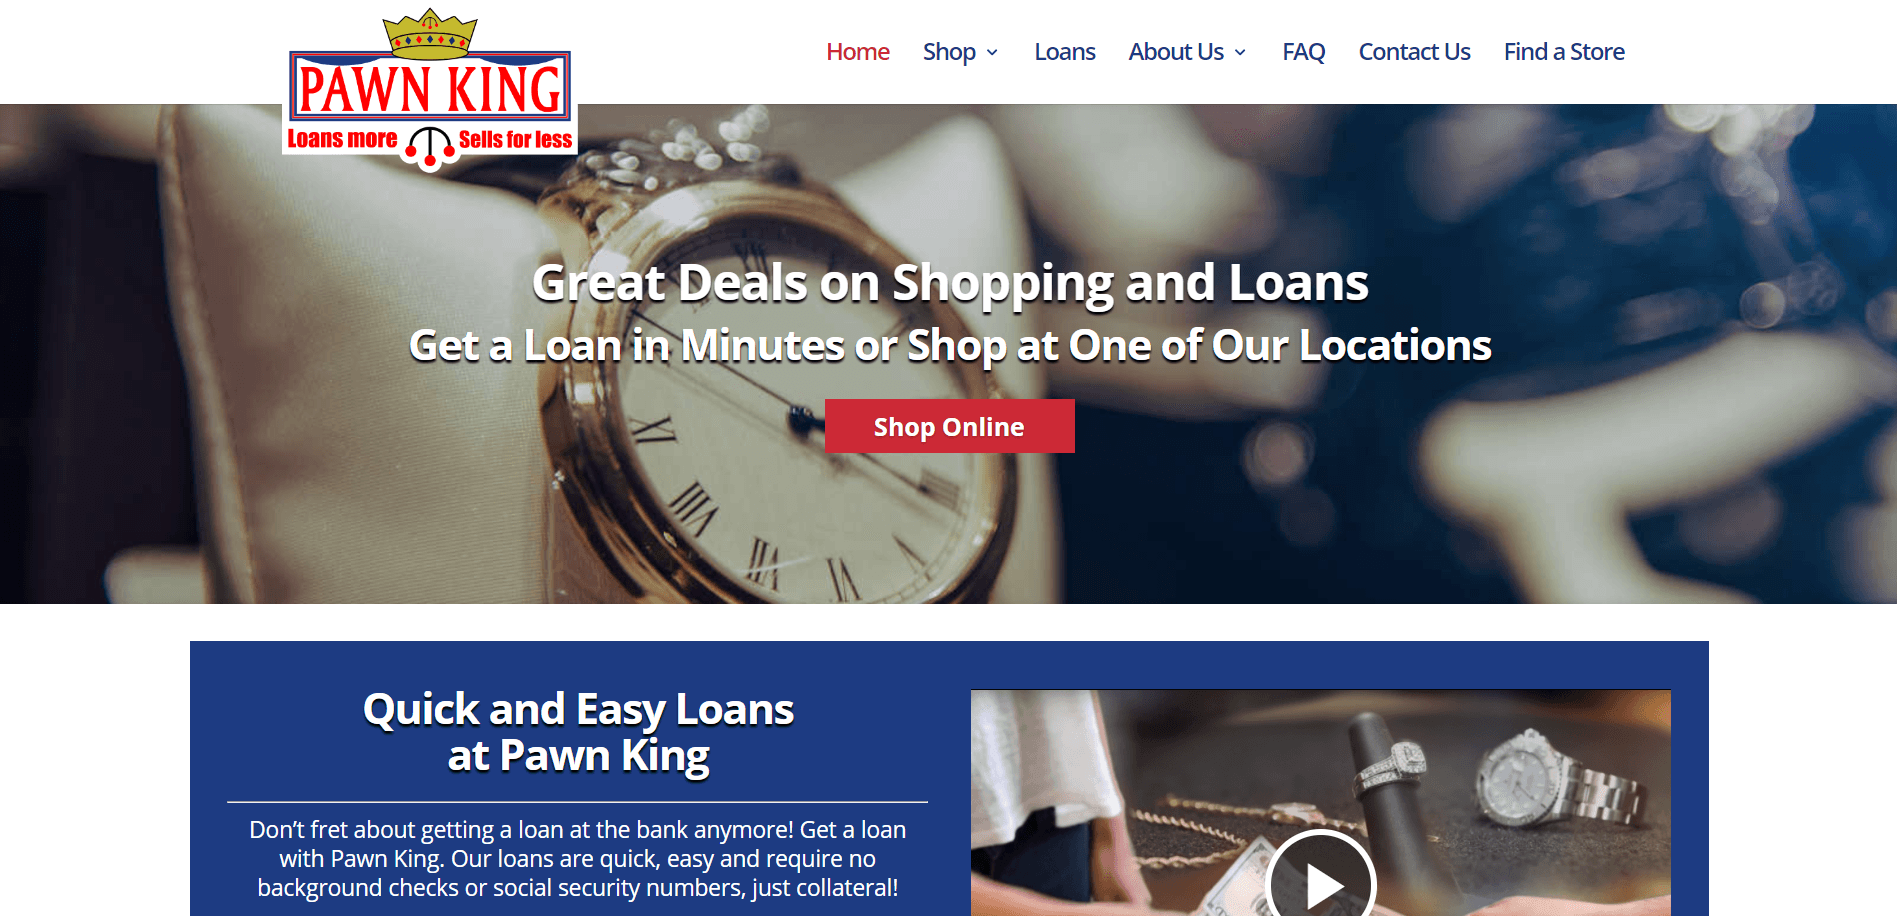 Pawn King Website Example - Qualbe Marketing Group